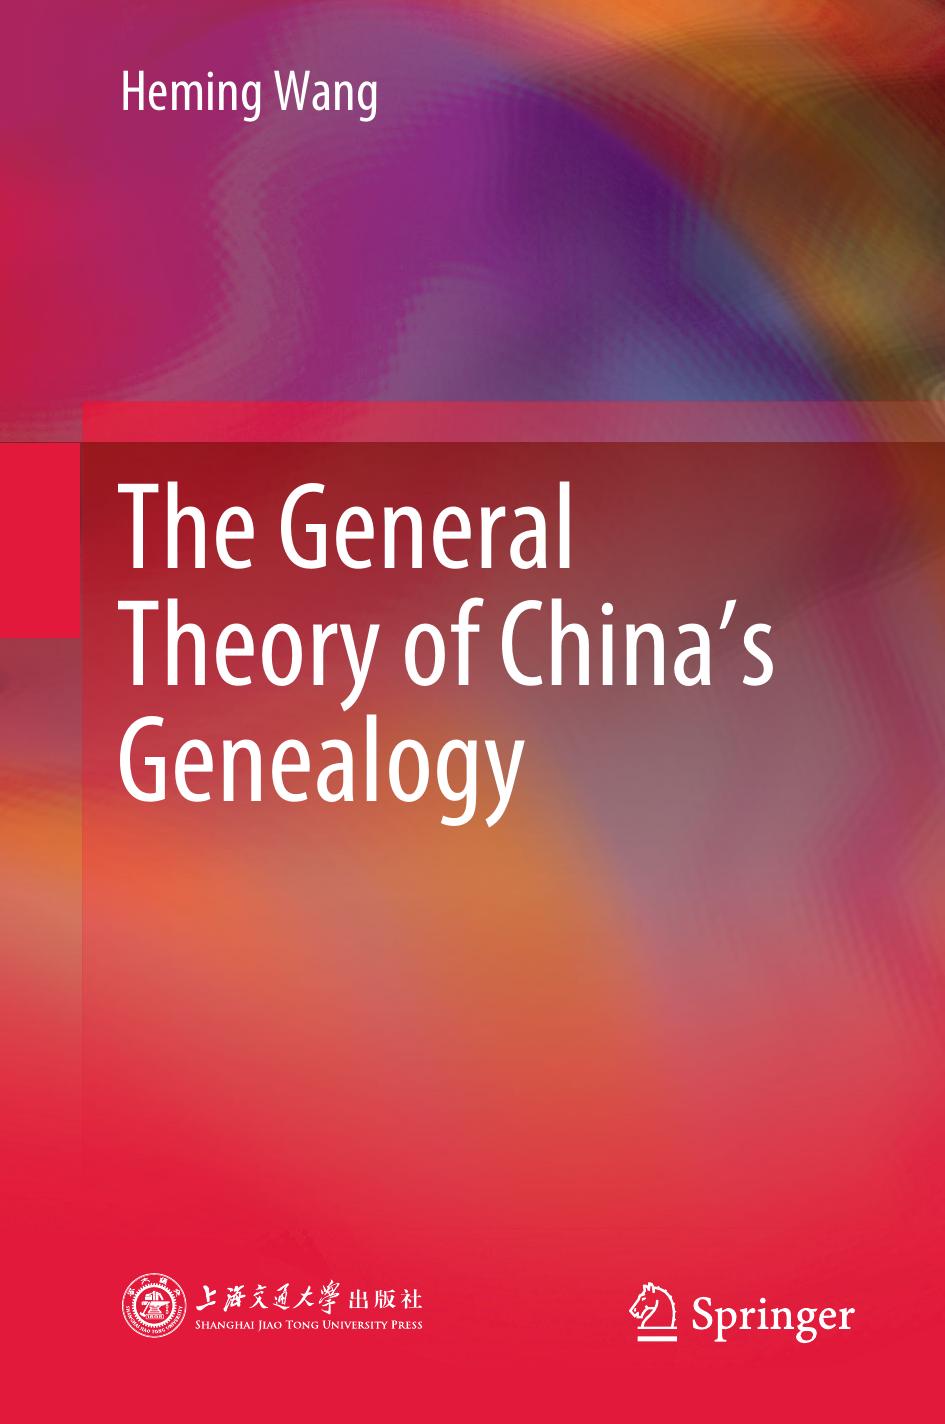 The General Theory of Chinaâs Genealogy by Heming Wang